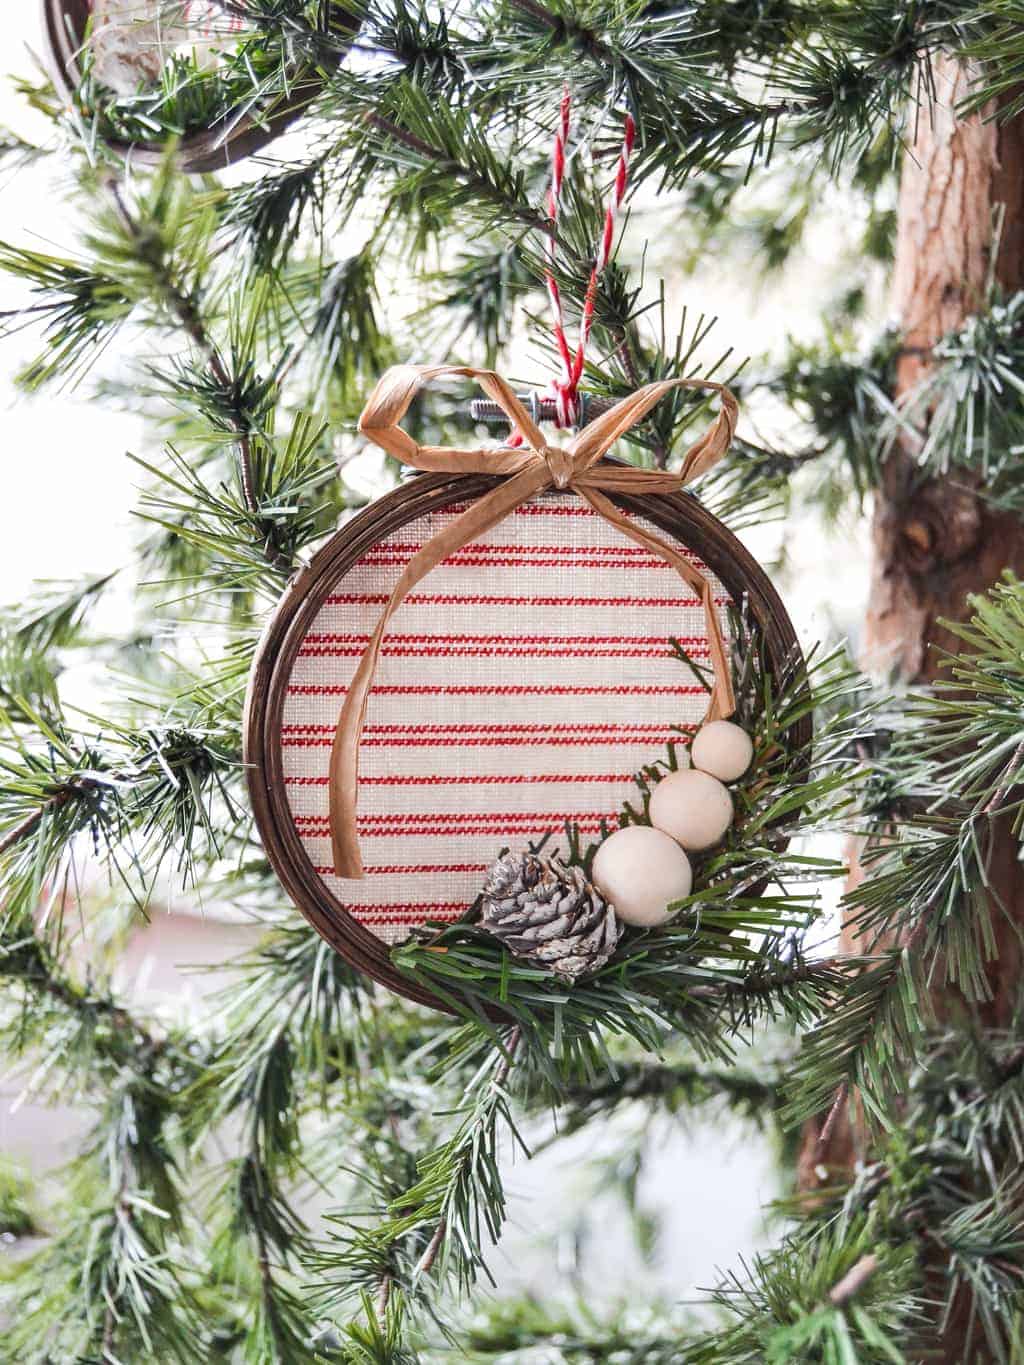 A wooden embroidery hoop decorated to become a Christmas tree ornament.